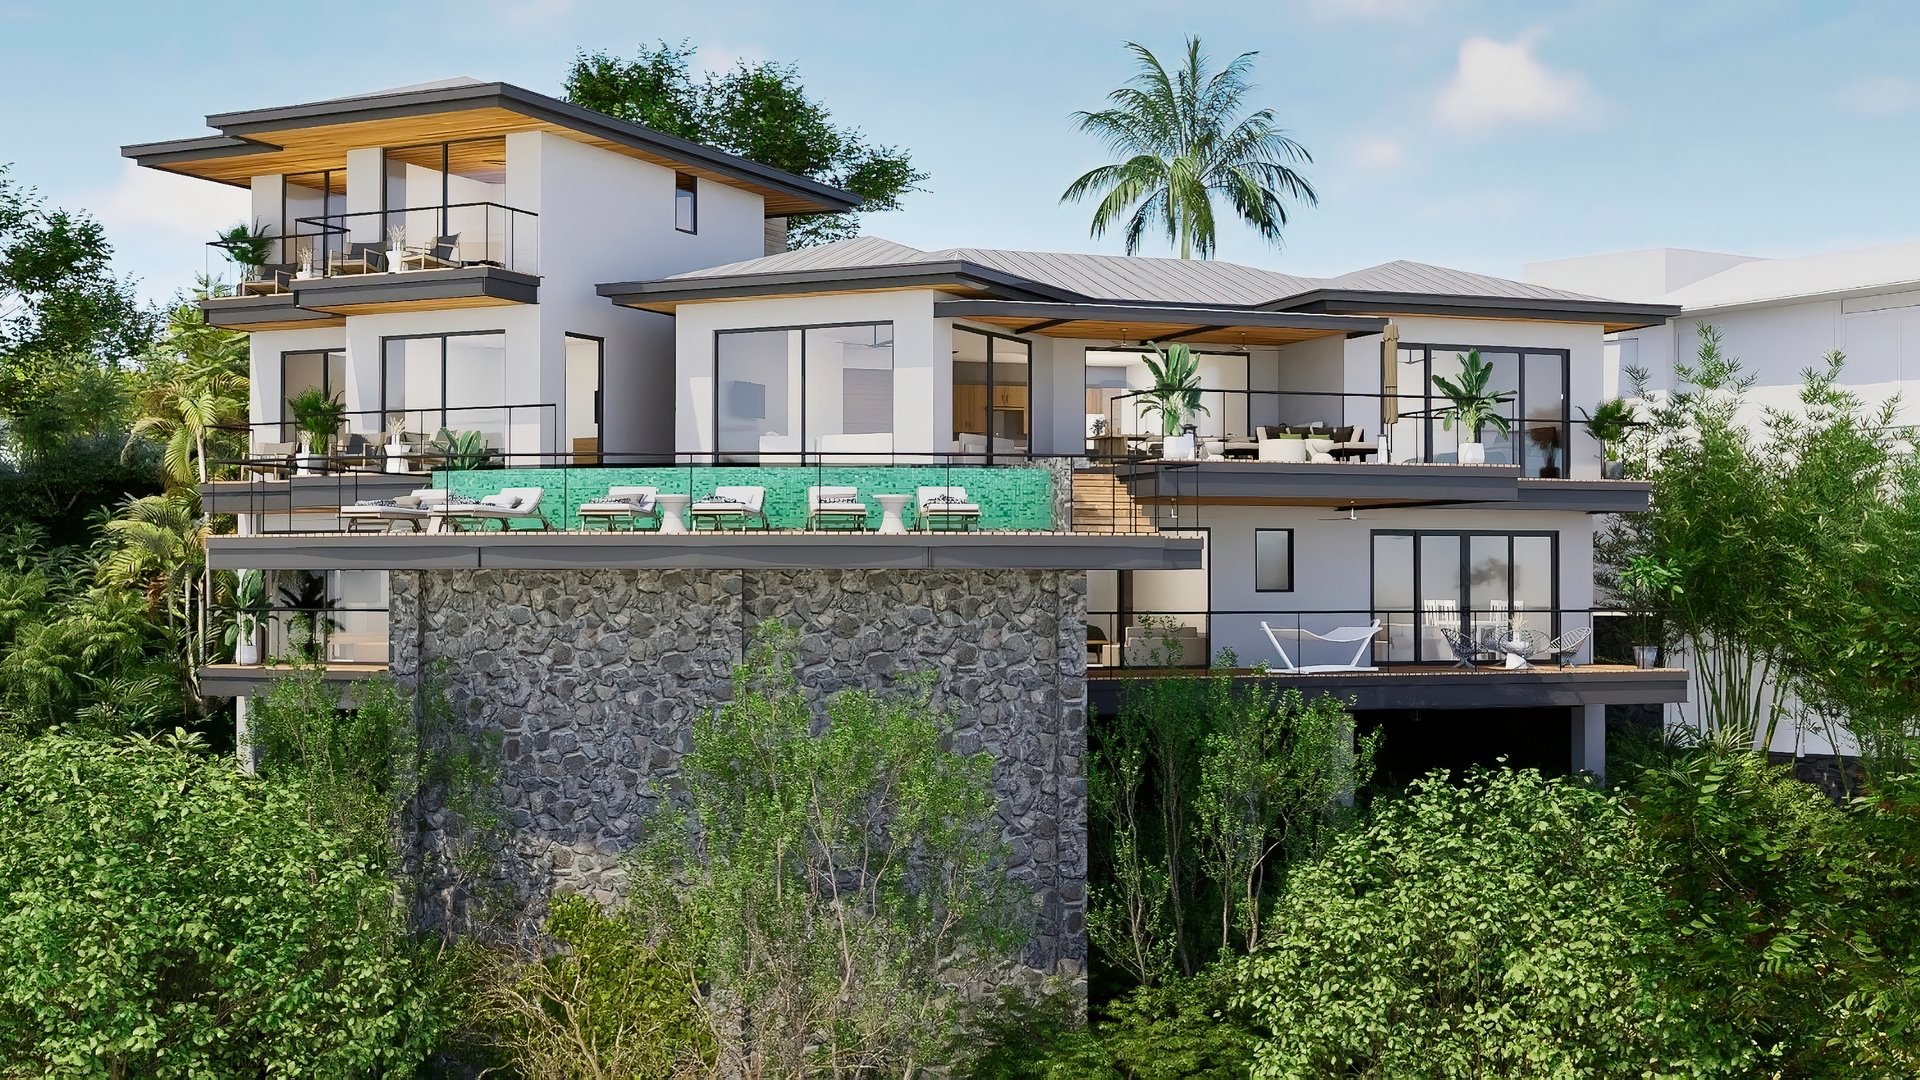 7922-The infinity-edge pool of the brand new home for sale in Tamarindo, Costa Rica